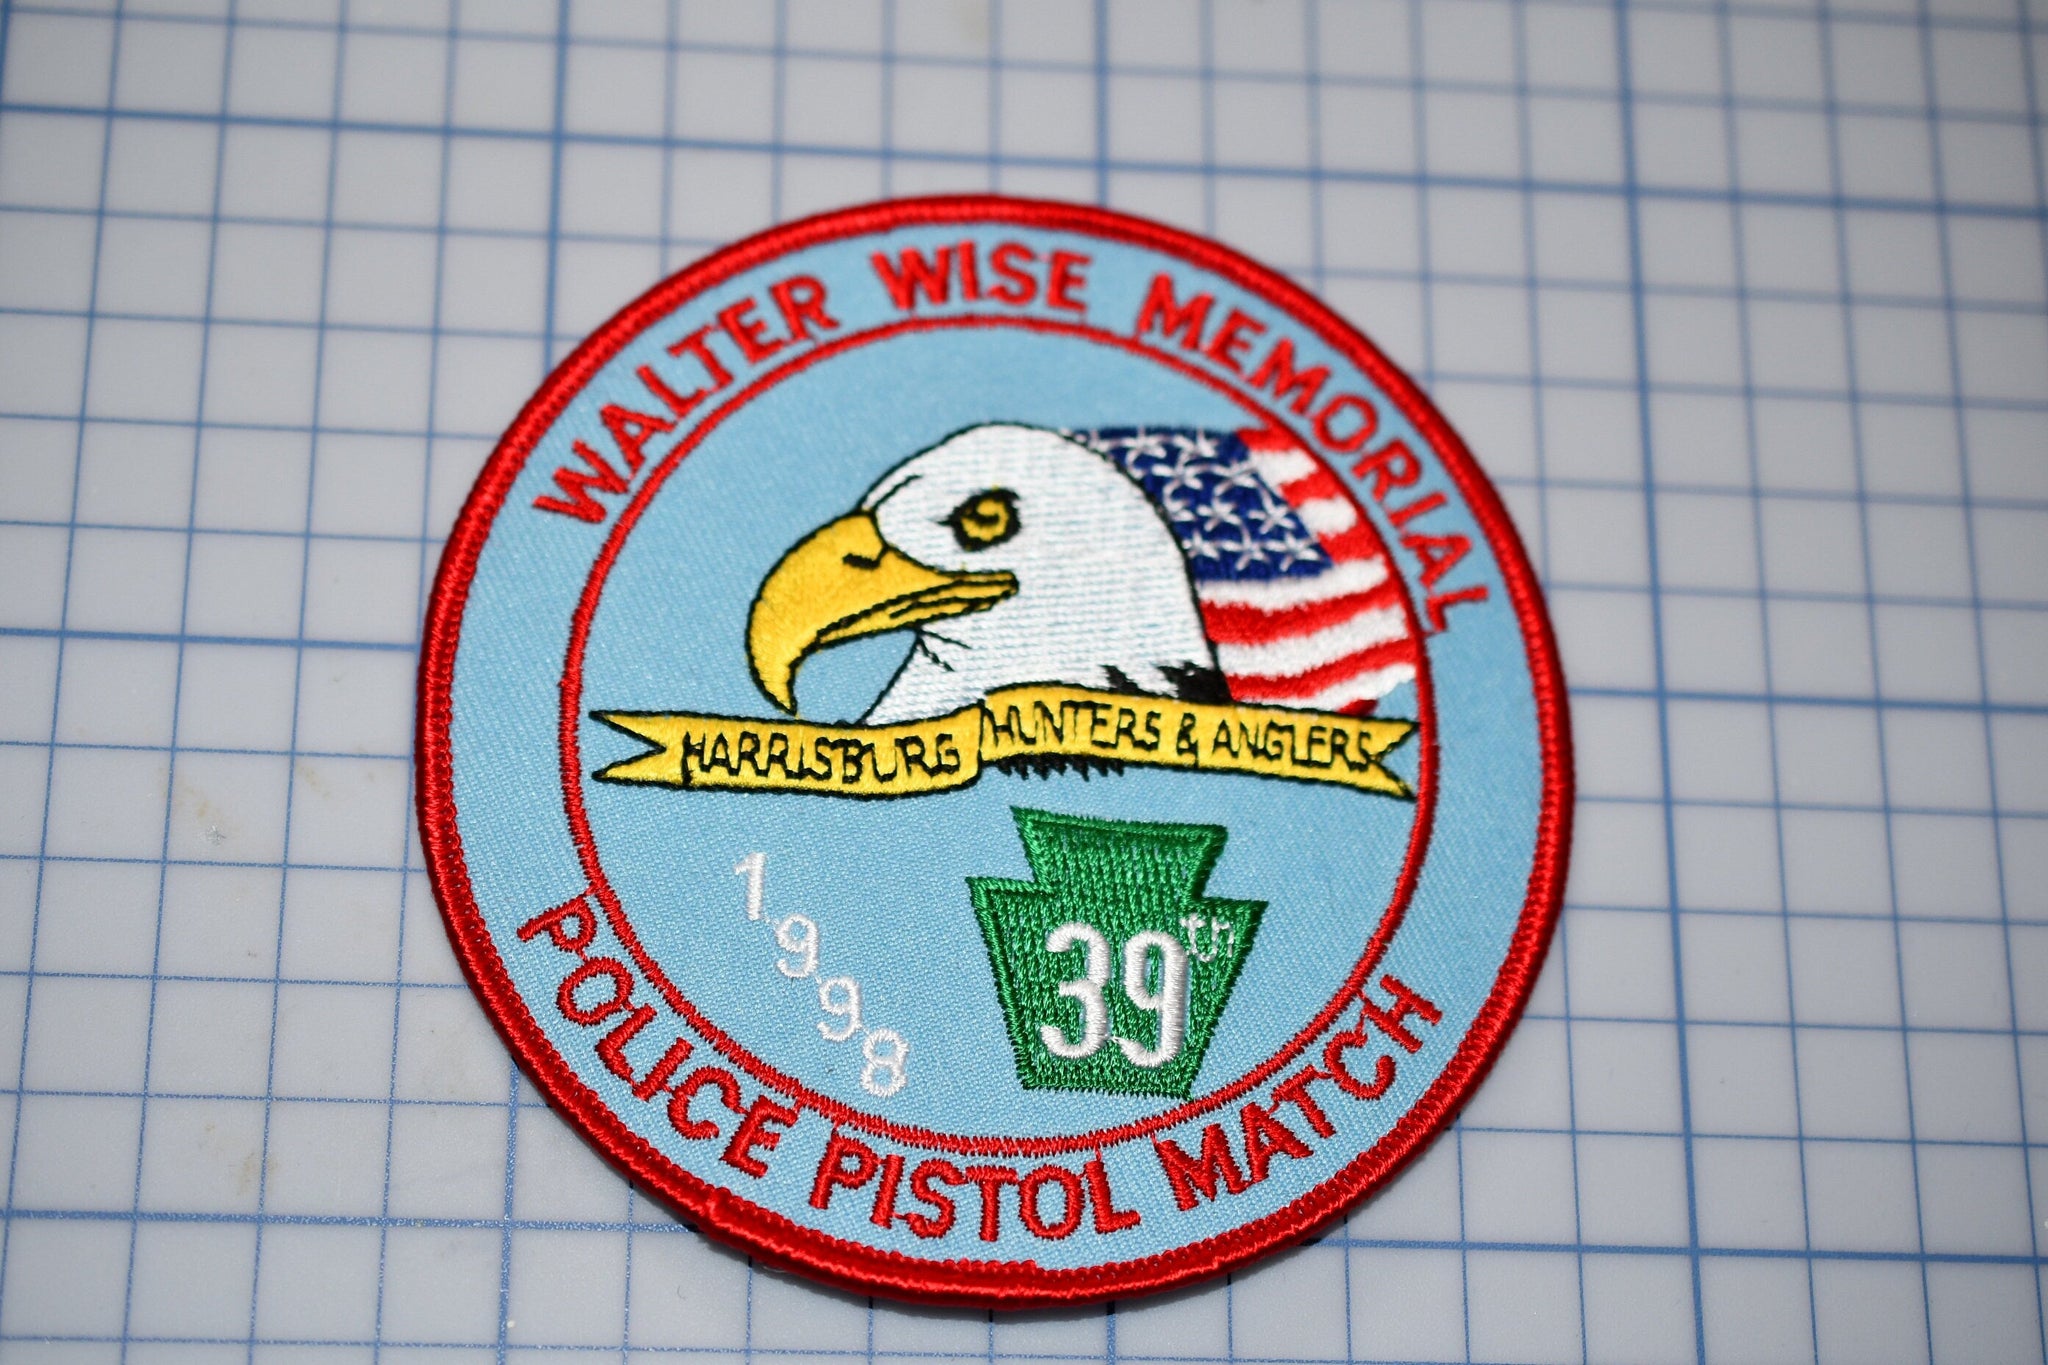 Walter Wise Memorial Police Pistol Match Pennsylvania Patch (S3-245)